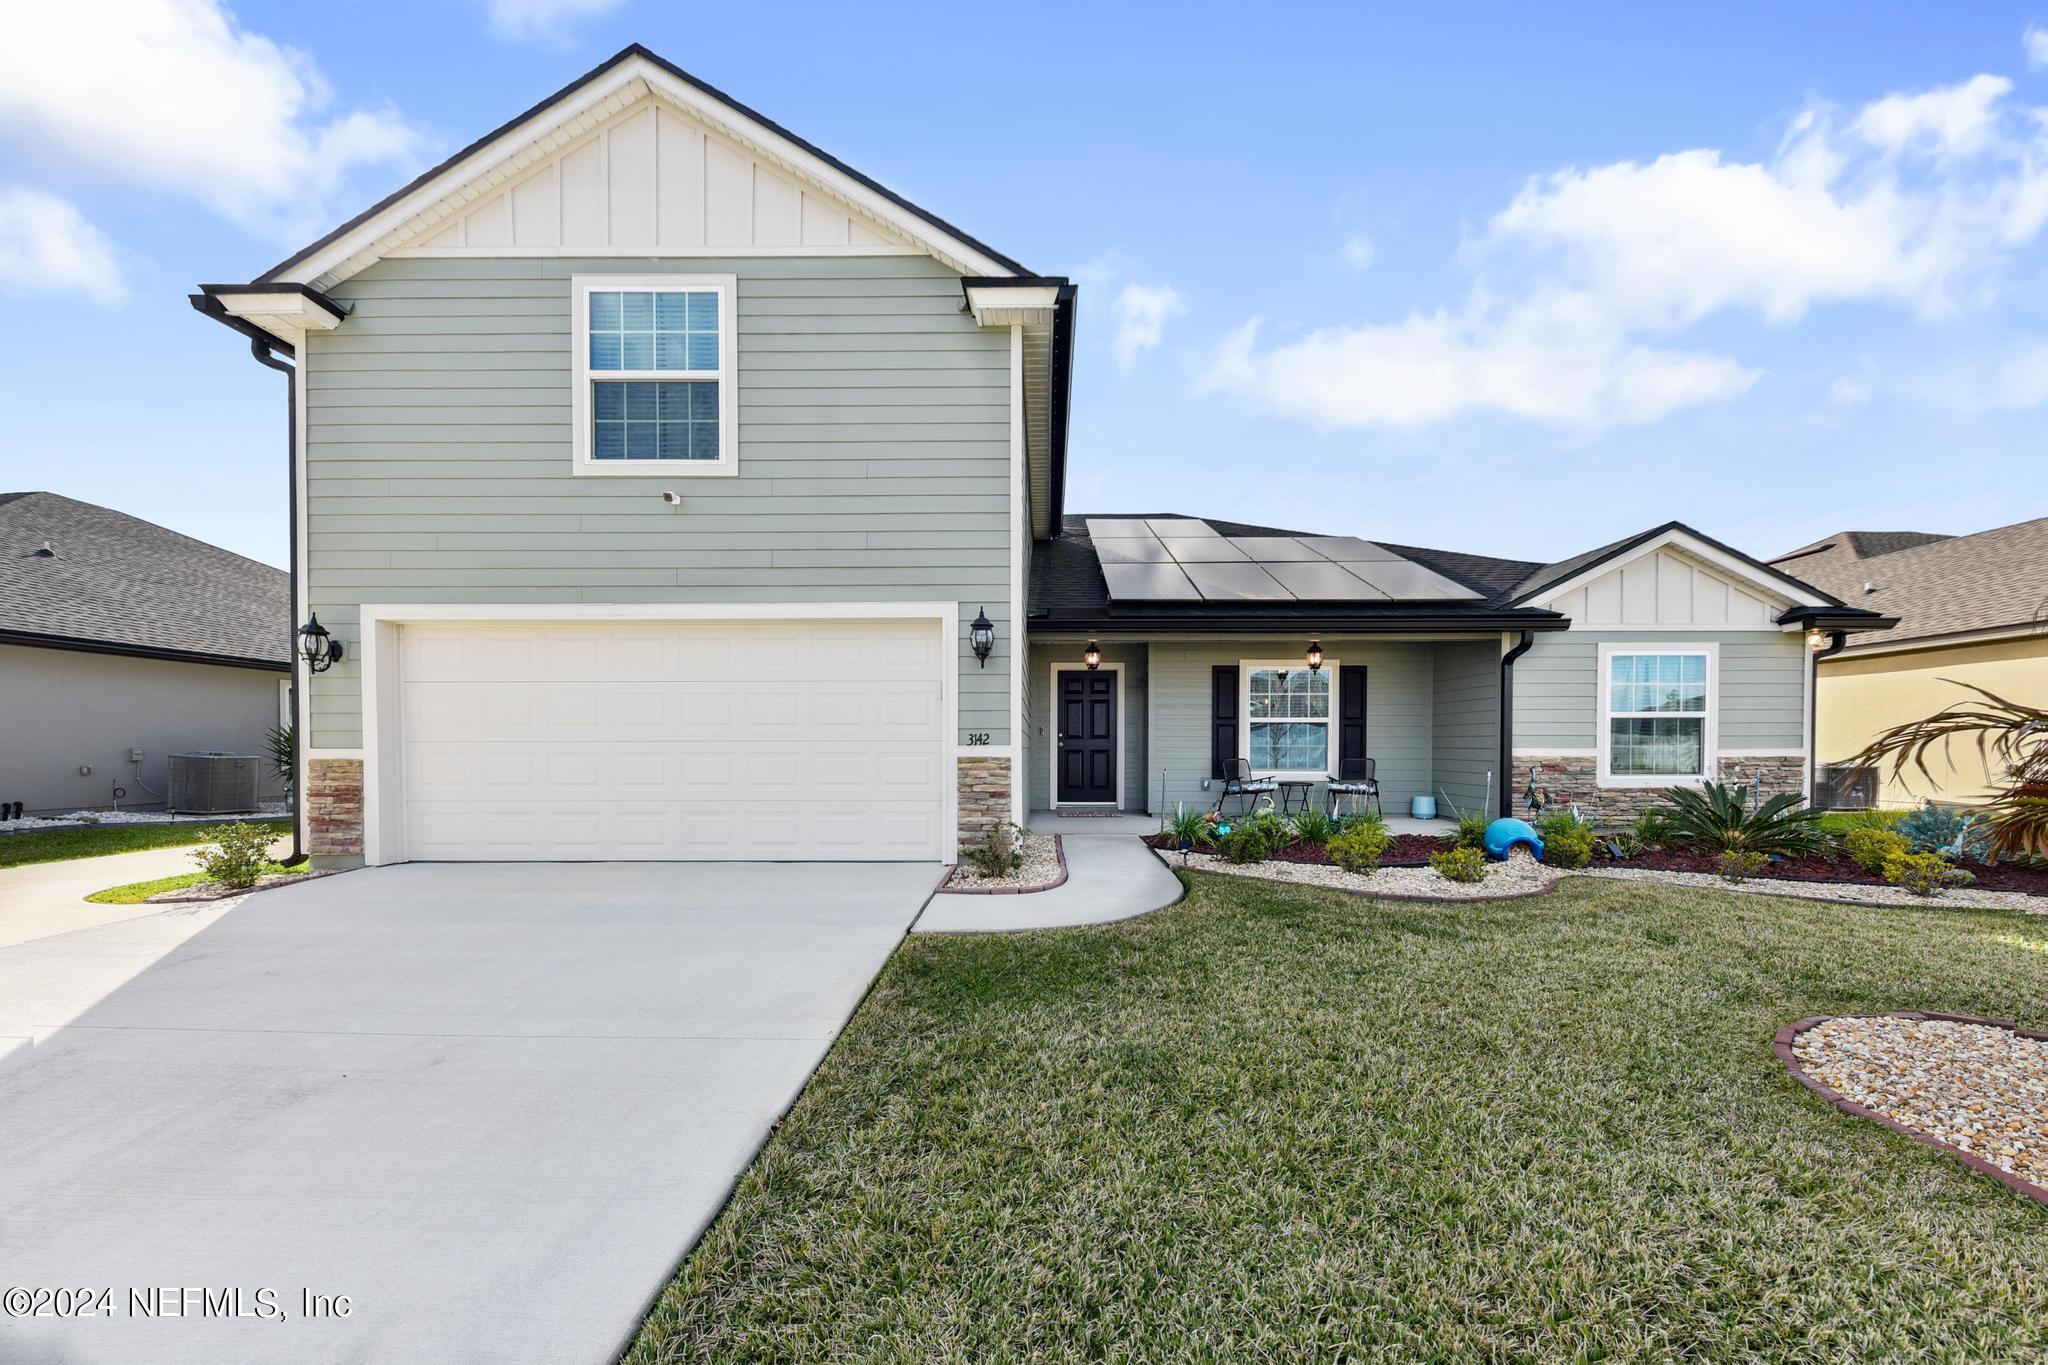 Green Cove Springs, FL home for sale located at 3142 Valiant Court, Green Cove Springs, FL 32043